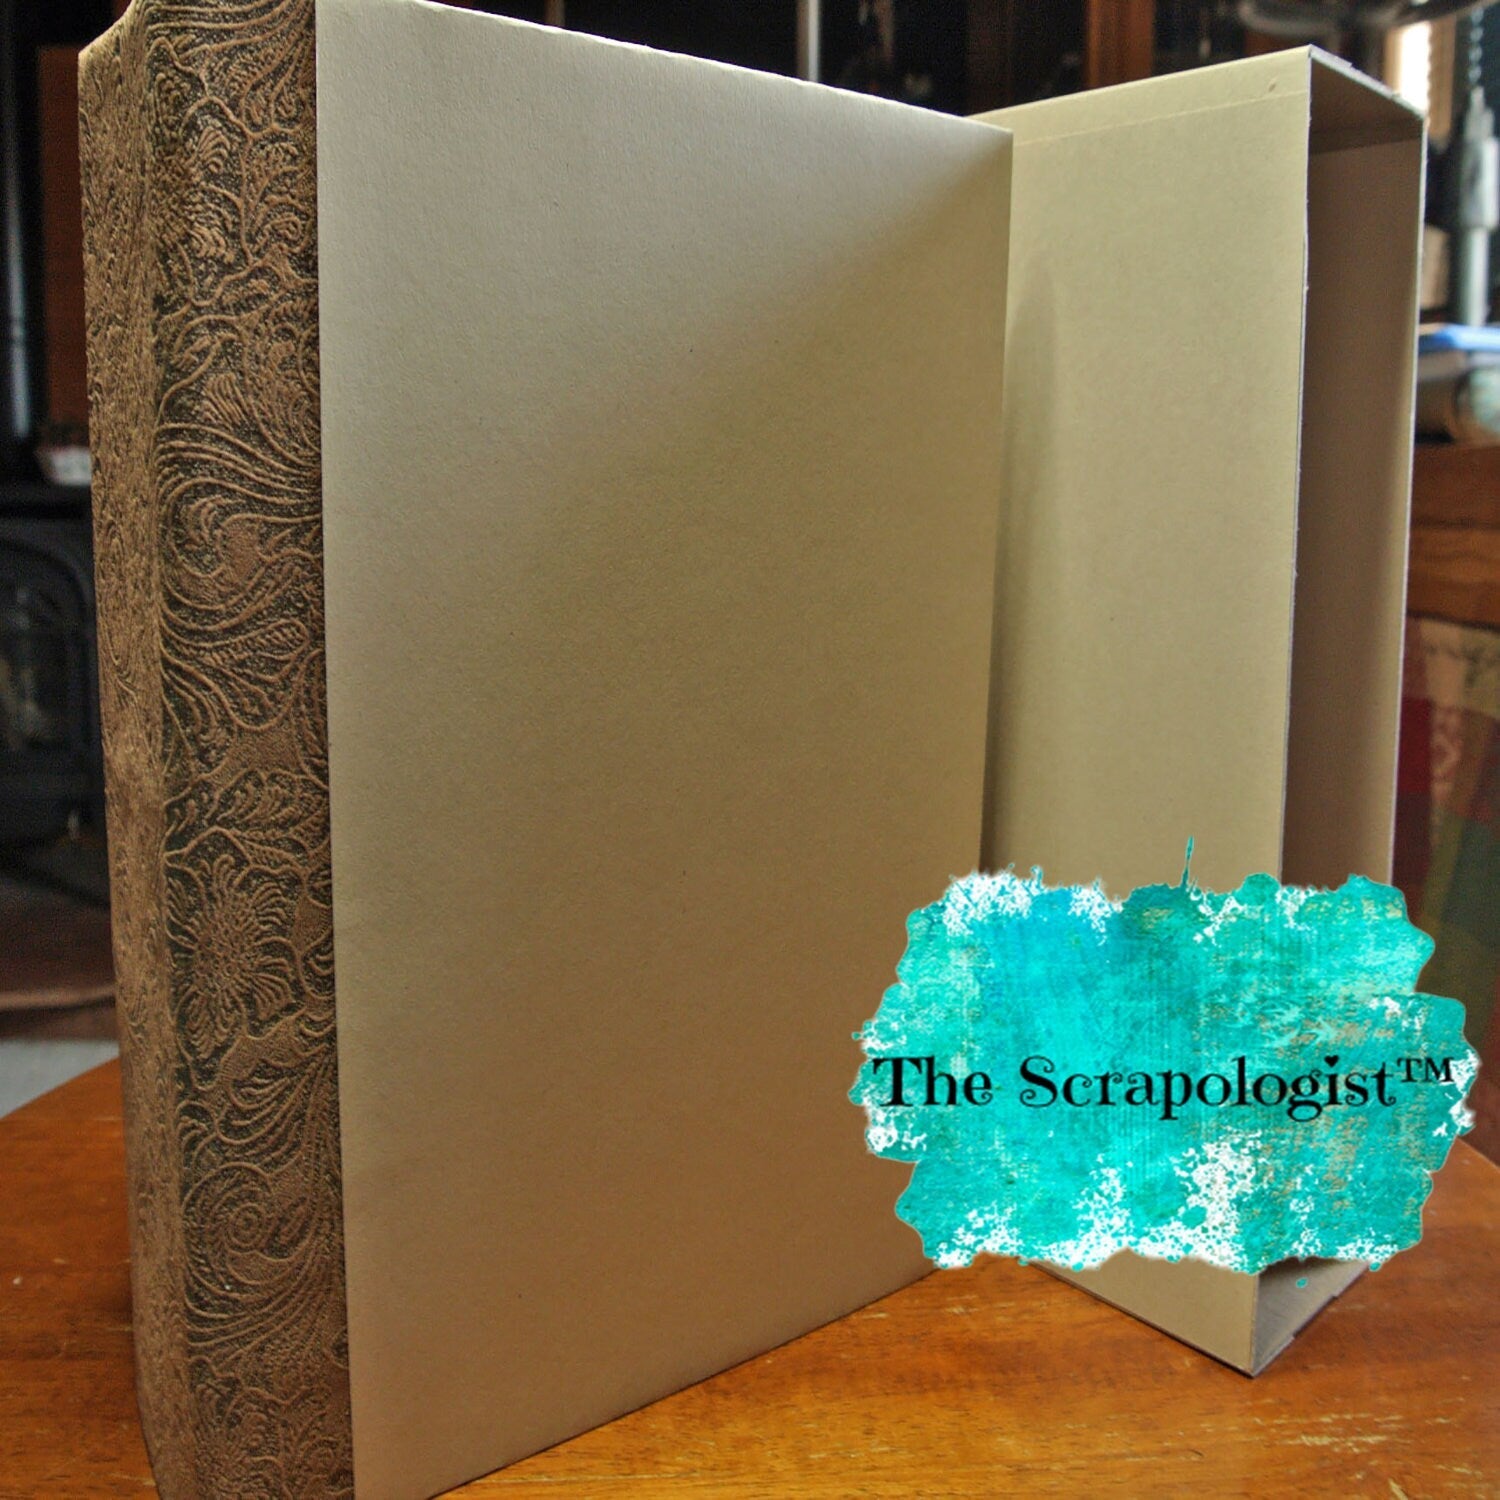 Custom Order Mini Album, Handmade, One-of-a-Kind Scrapbook or Photo Album for Wedding or Special Occasion